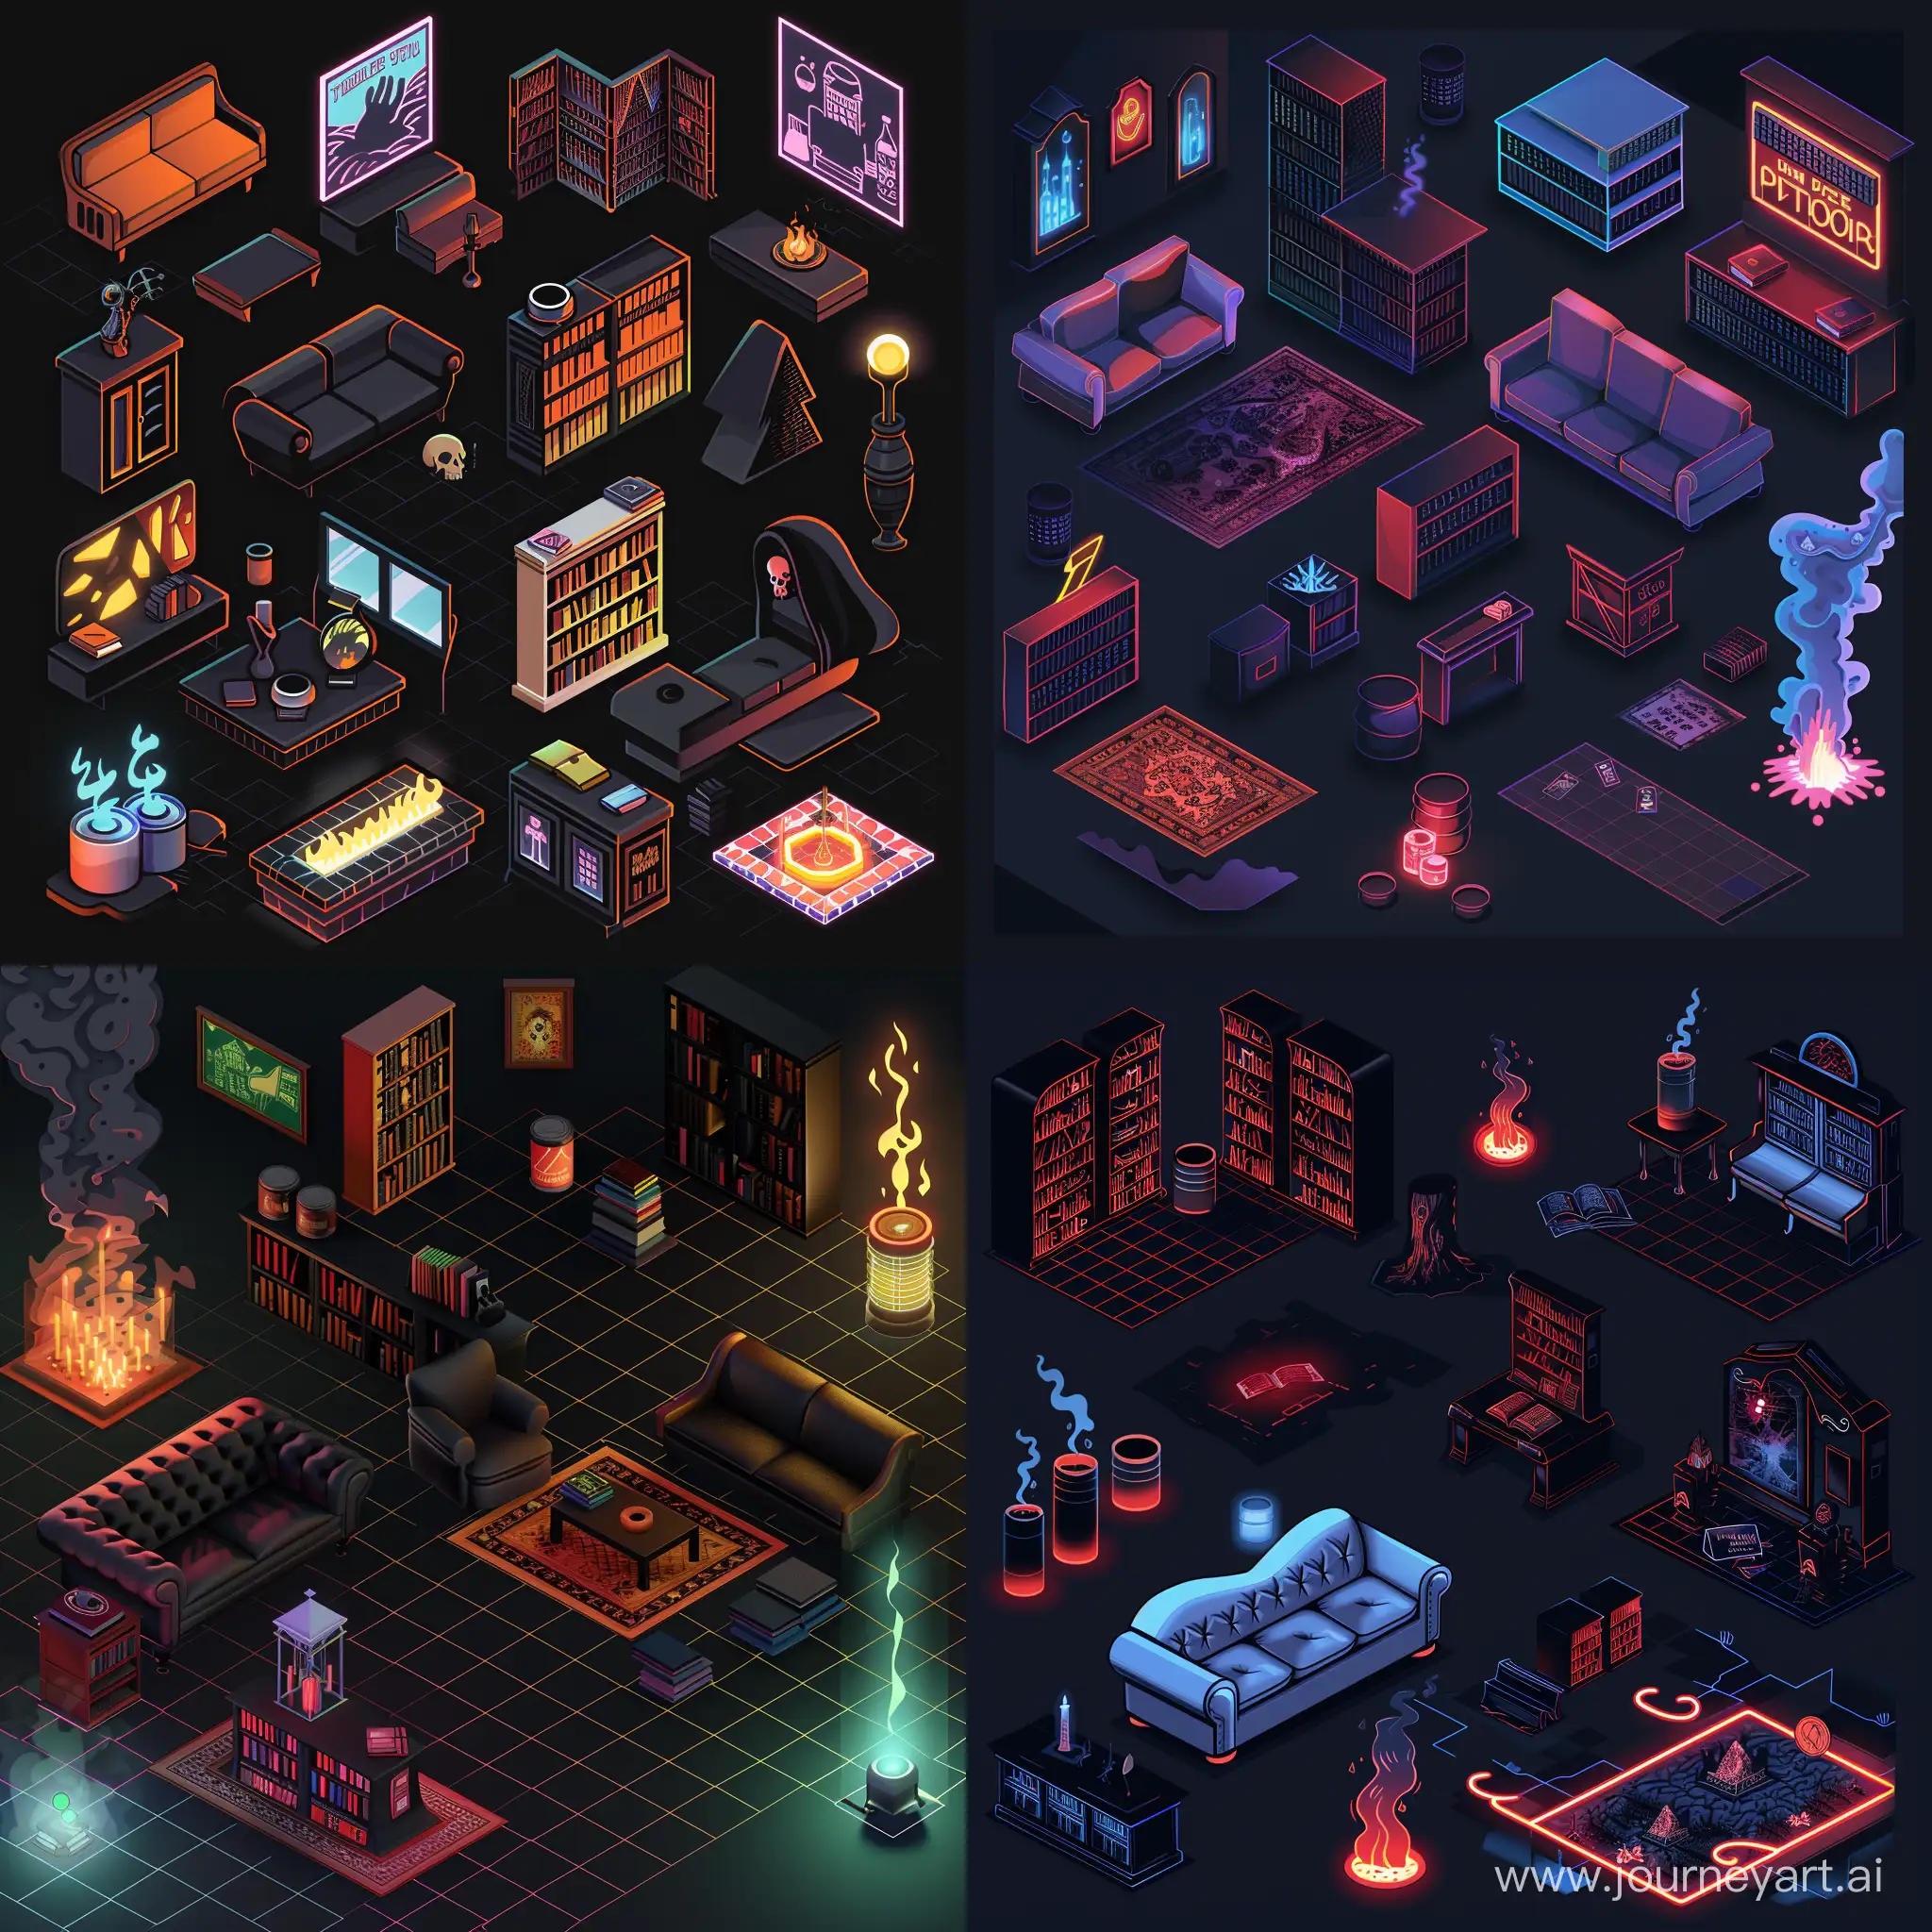 Eerie-Isometric-Ghost-Town-Interior-with-Black-Sofa-and-Neon-Lighting